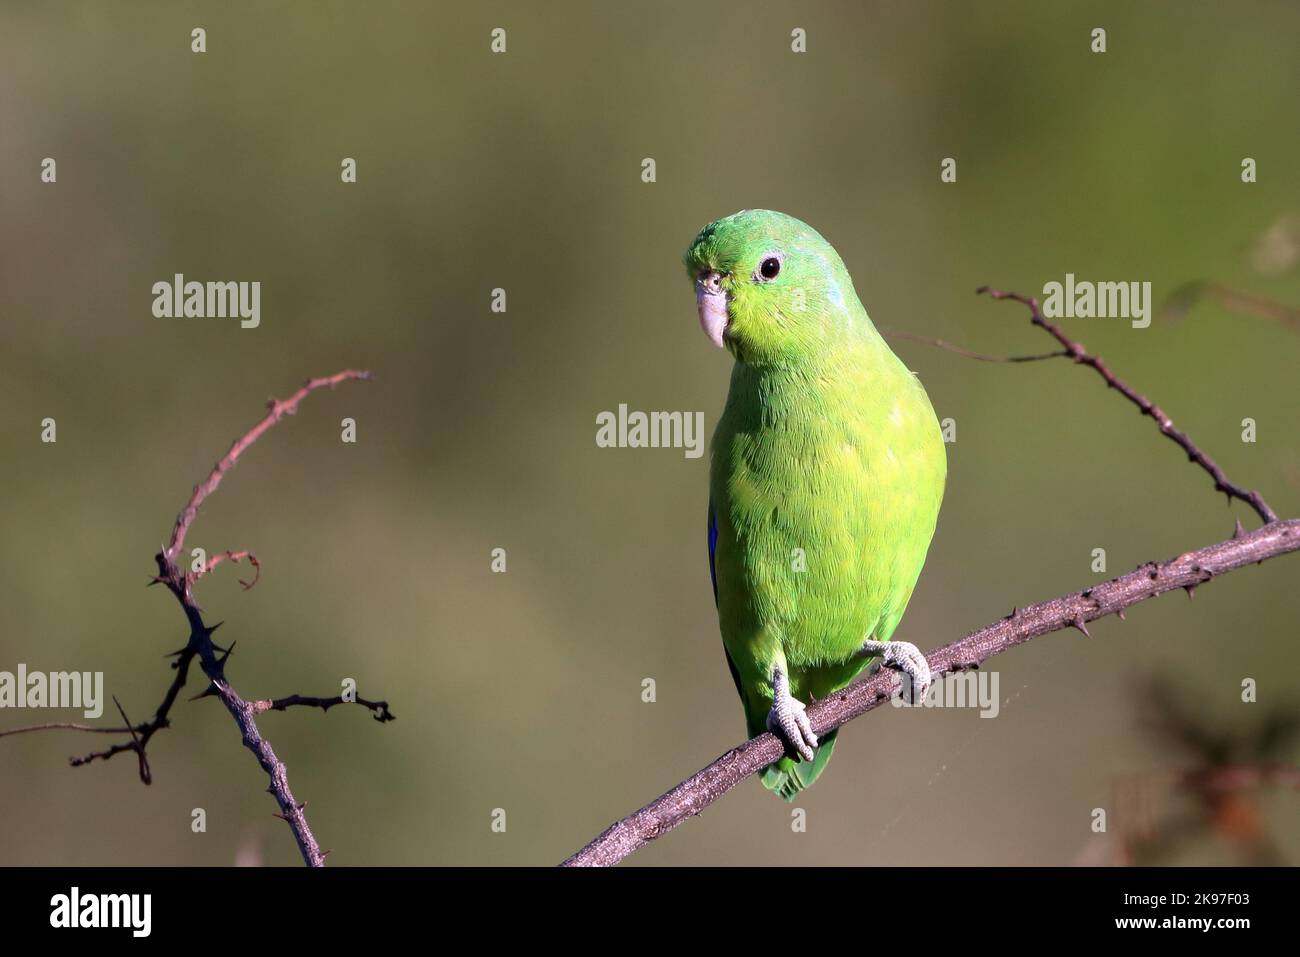 male Blue-winged Parrotlet (Forpus xanthopterygius), isolated, perched on a greenish-yellow background Stock Photo